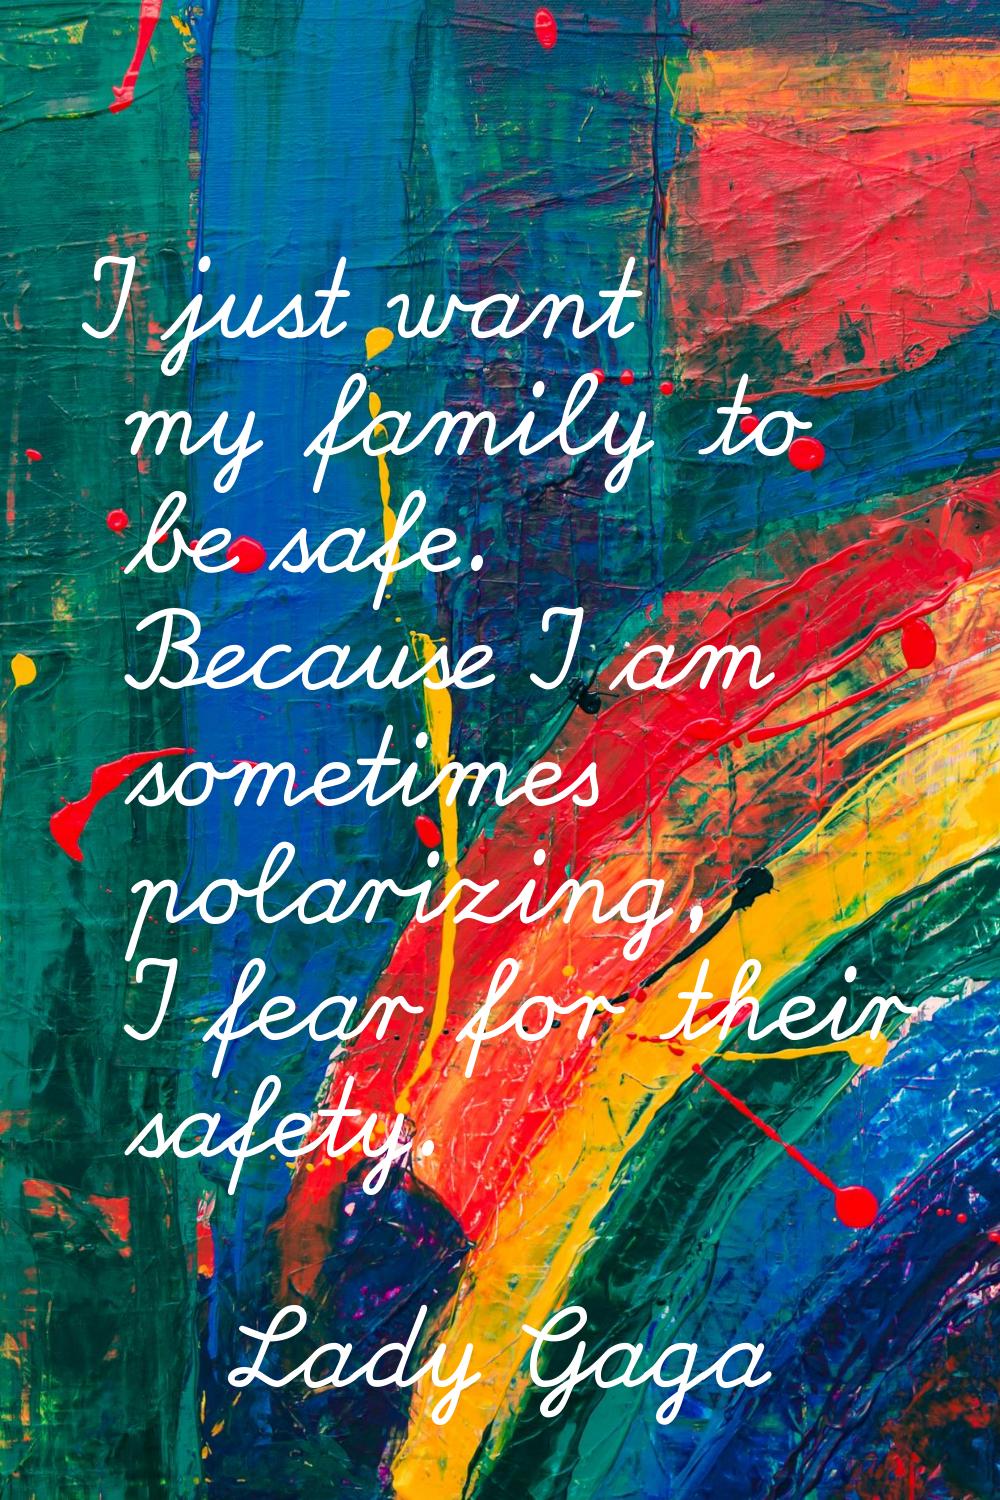 I just want my family to be safe. Because I am sometimes polarizing, I fear for their safety.